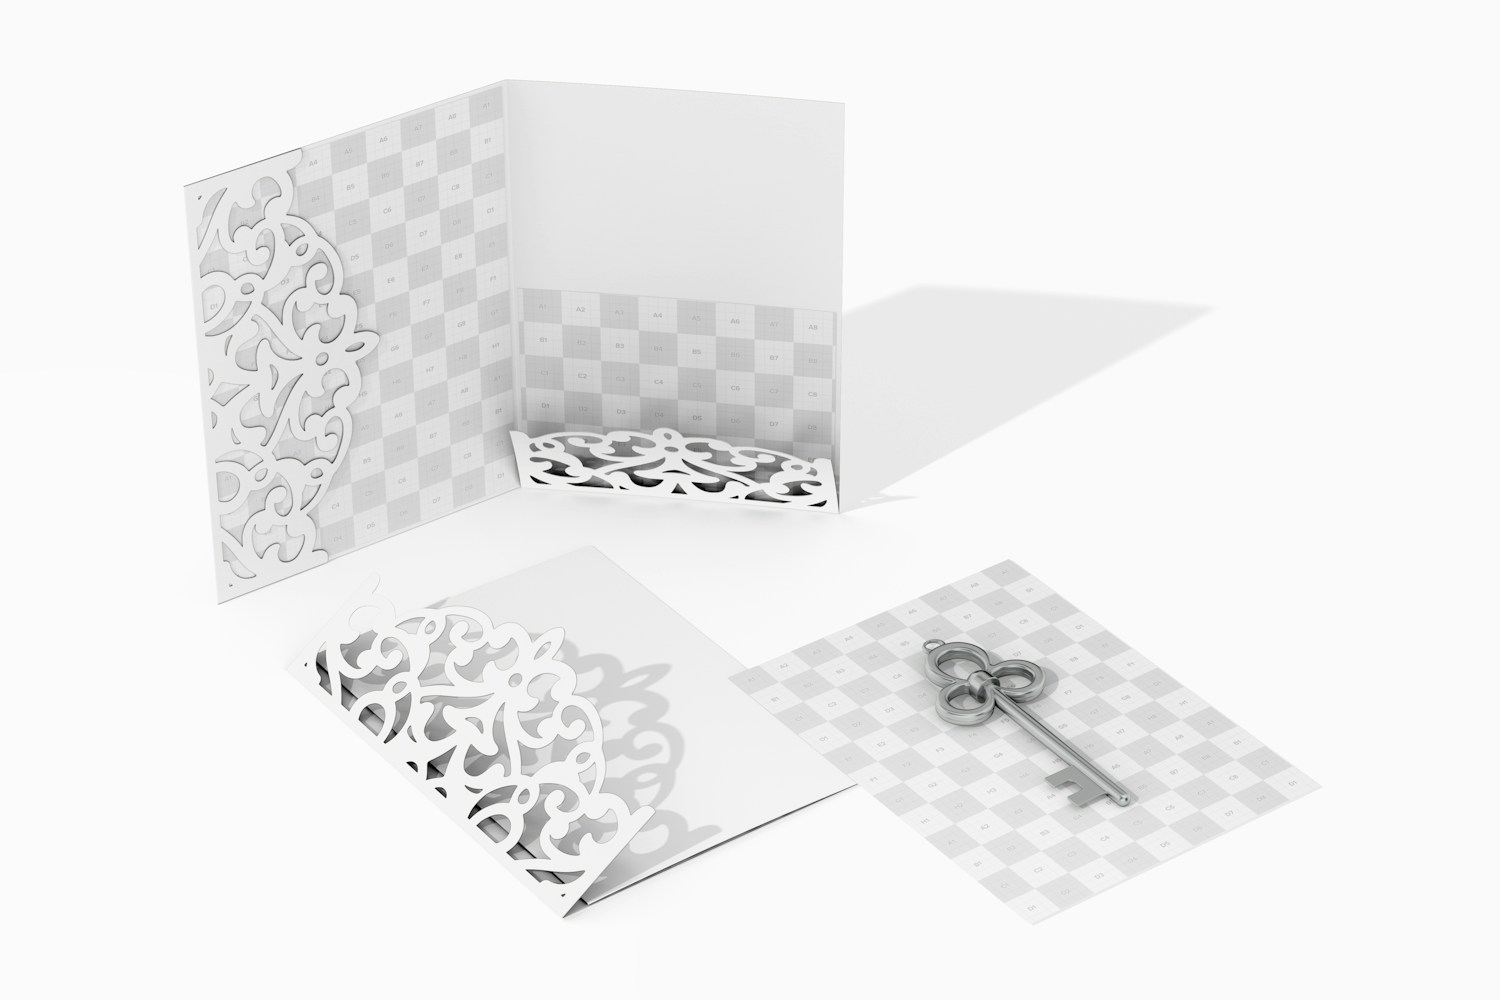 Double Invitation Card with Die Cut Mockup, Opened and Closed